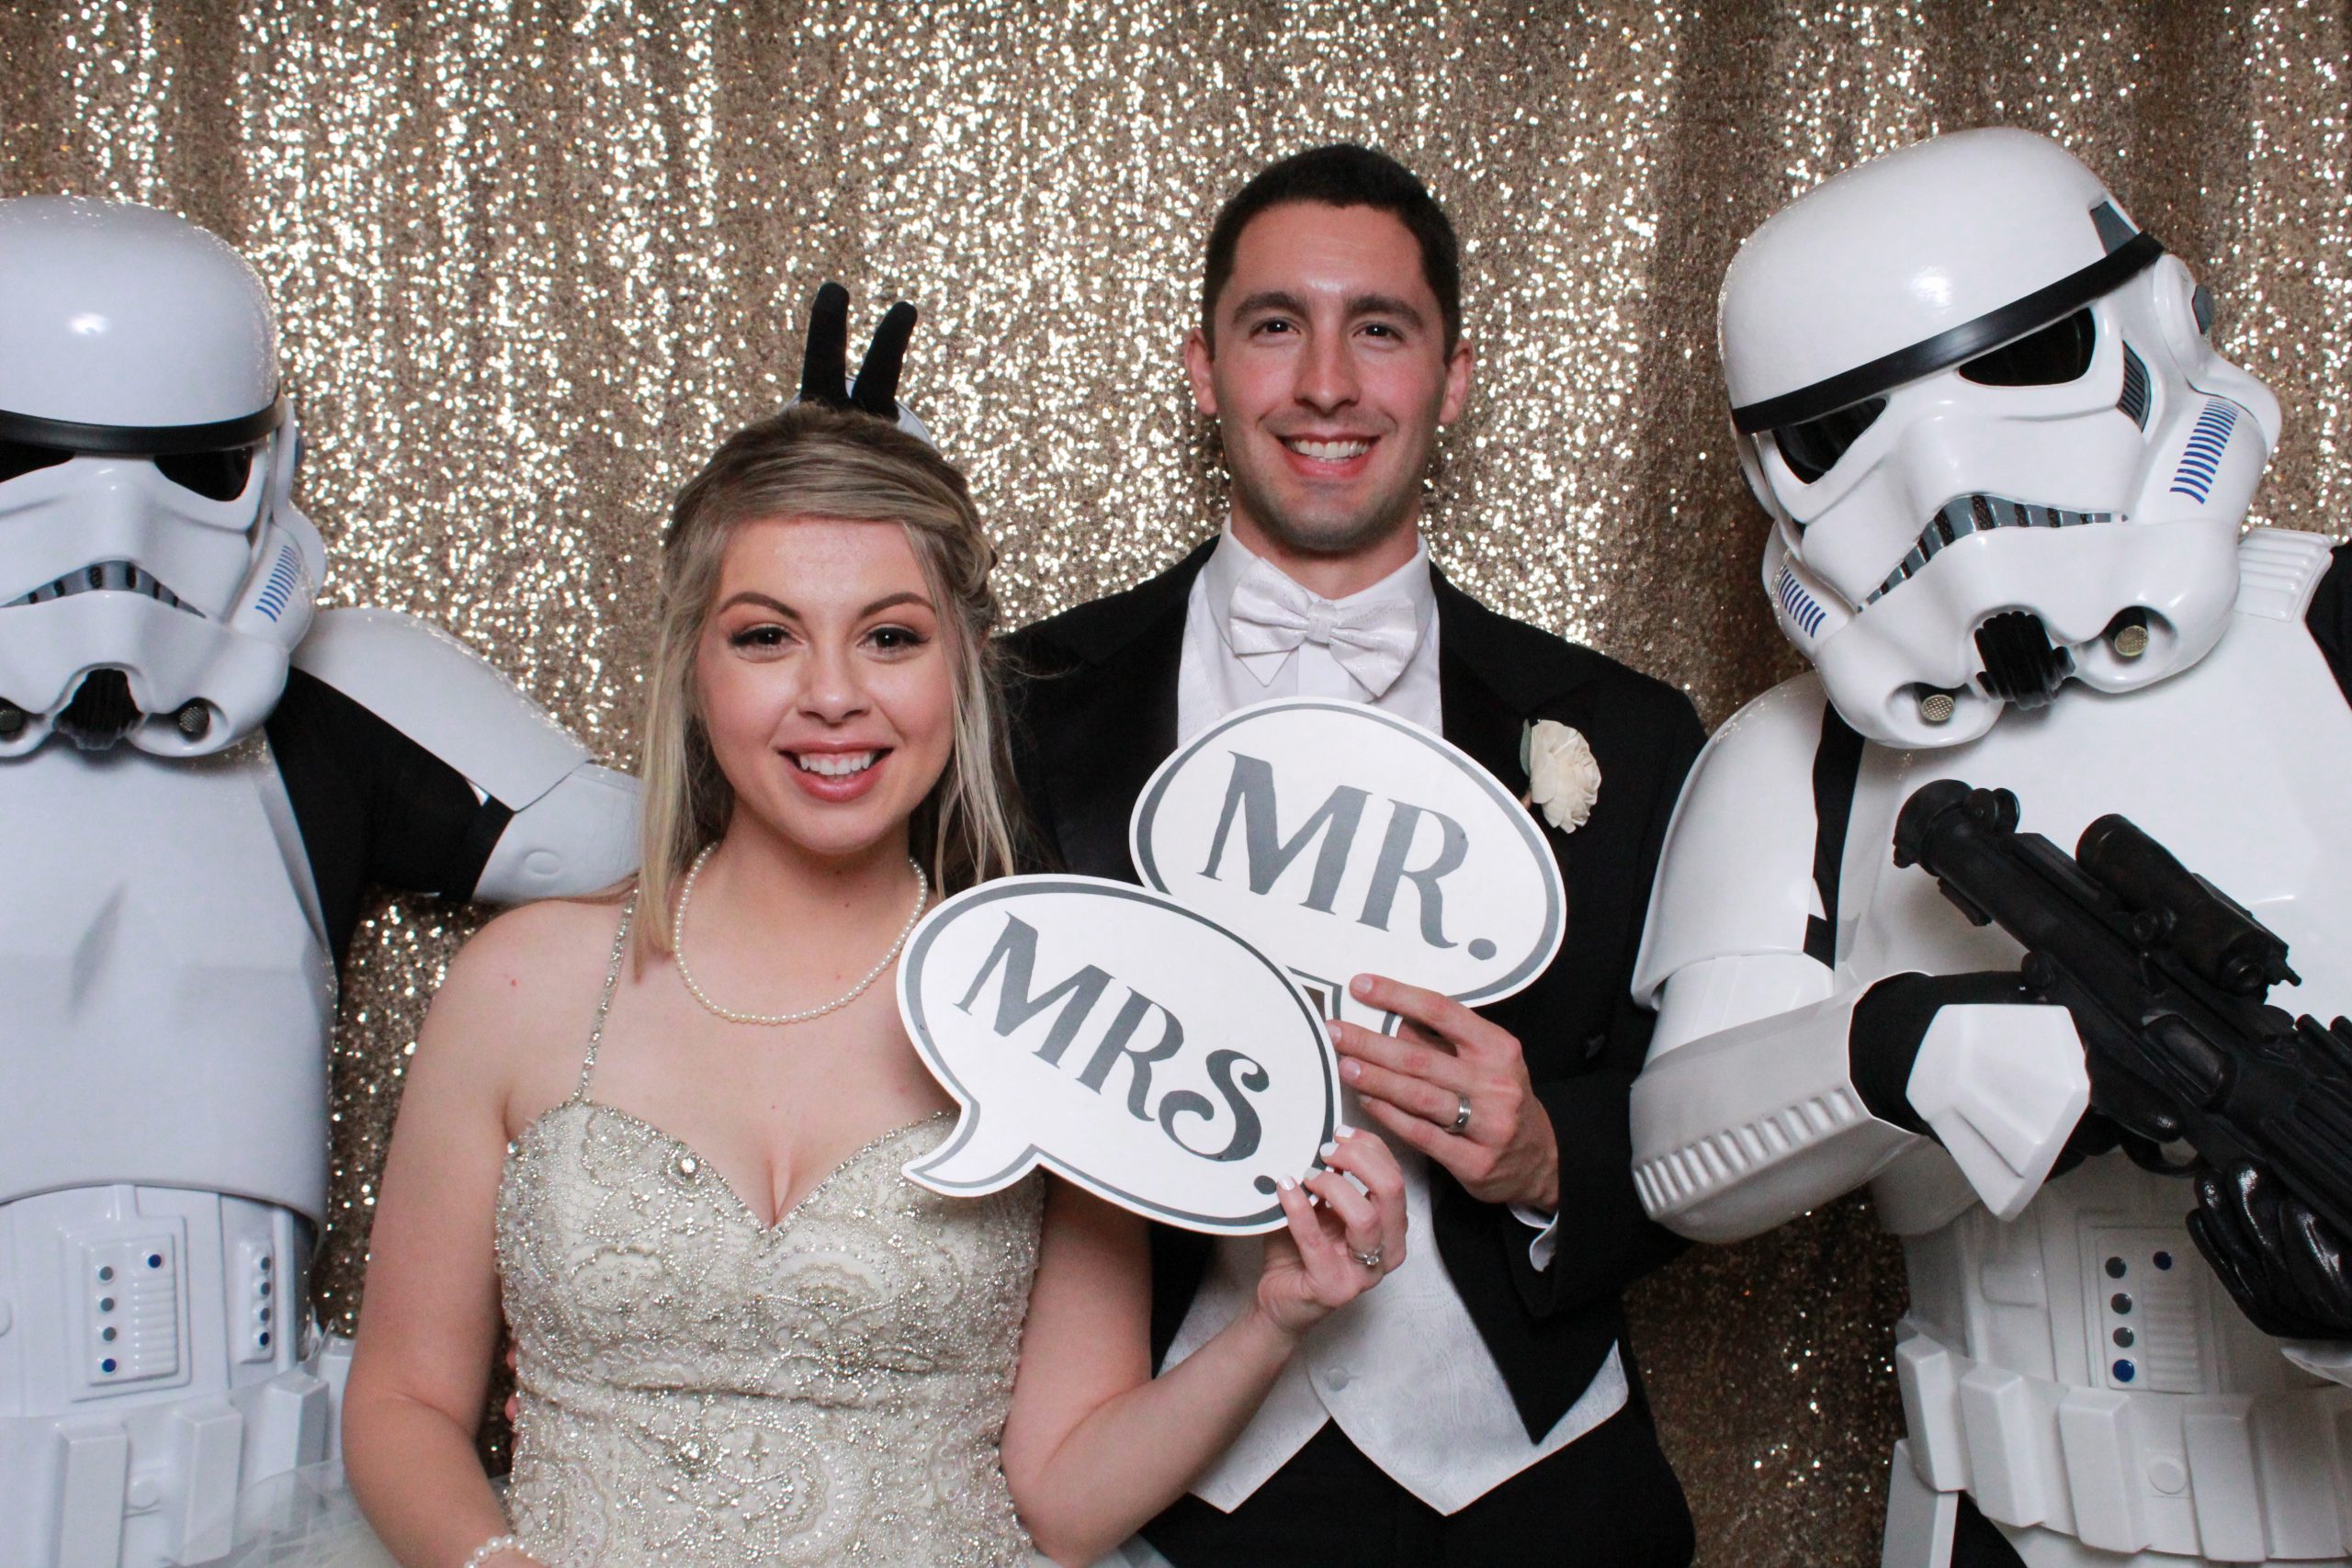 wedding photo booth with star wars